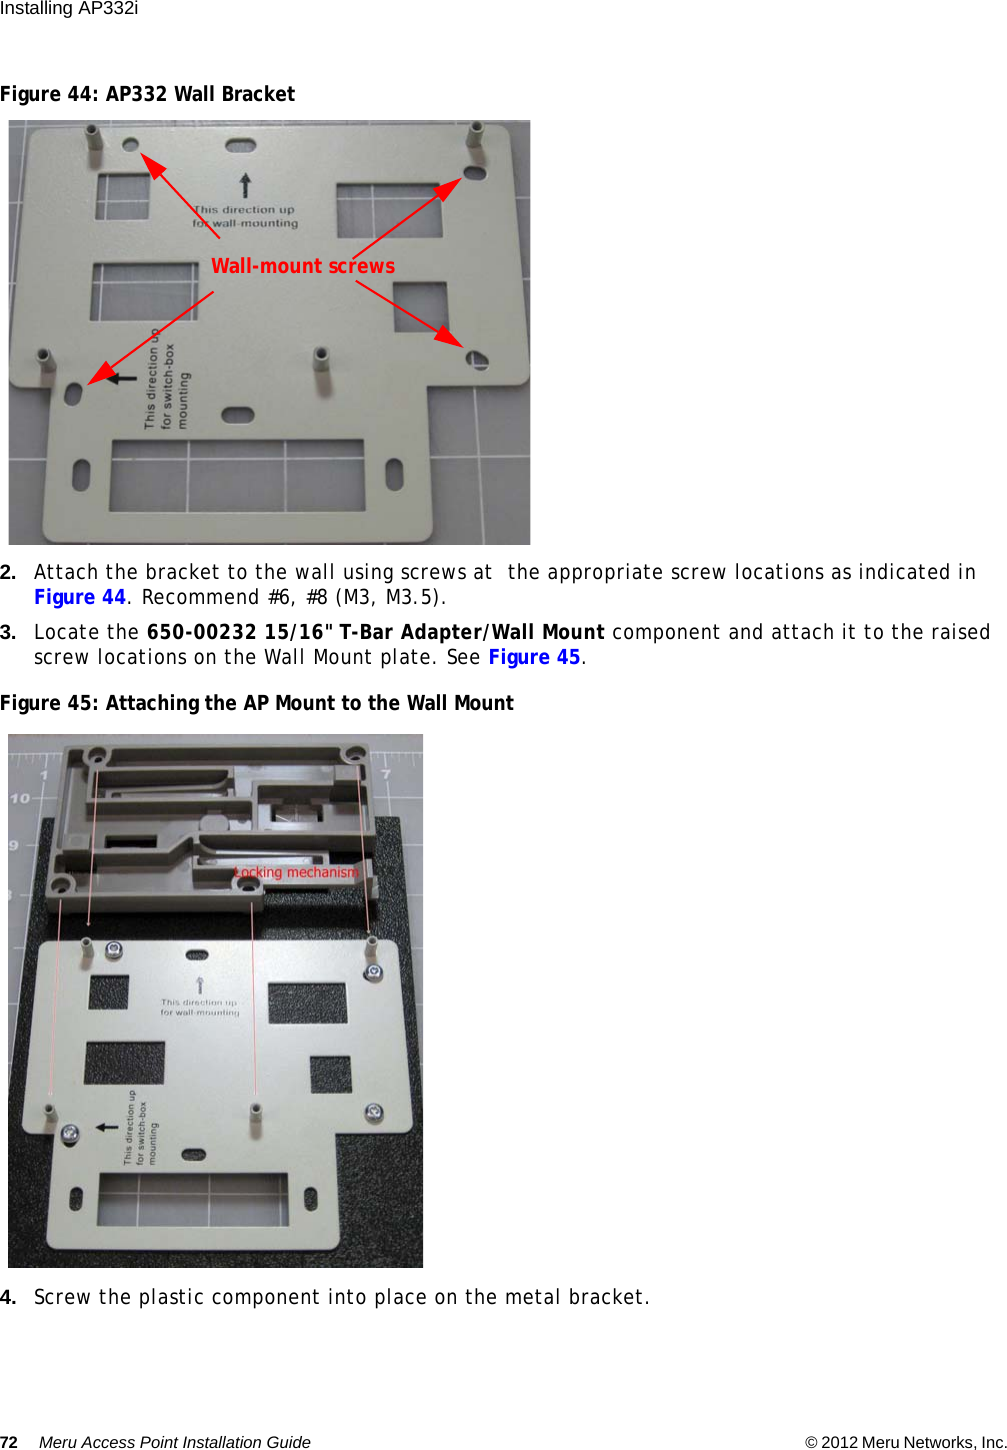 72 Meru Access Point Installation Guide © 2012 Meru Networks, Inc. Installing AP332i Figure 44: AP332 Wall Bracket2. Attach the bracket to the wall using screws at  the appropriate screw locations as indicated in Figure 44. Recommend #6, #8 (M3, M3.5).3. Locate the 650-00232 15/16&quot; T-Bar Adapter/Wall Mount component and attach it to the raised screw locations on the Wall Mount plate. See Figure 45.Figure 45: Attaching the AP Mount to the Wall Mount4. Screw the plastic component into place on the metal bracket.Wall-mount screws